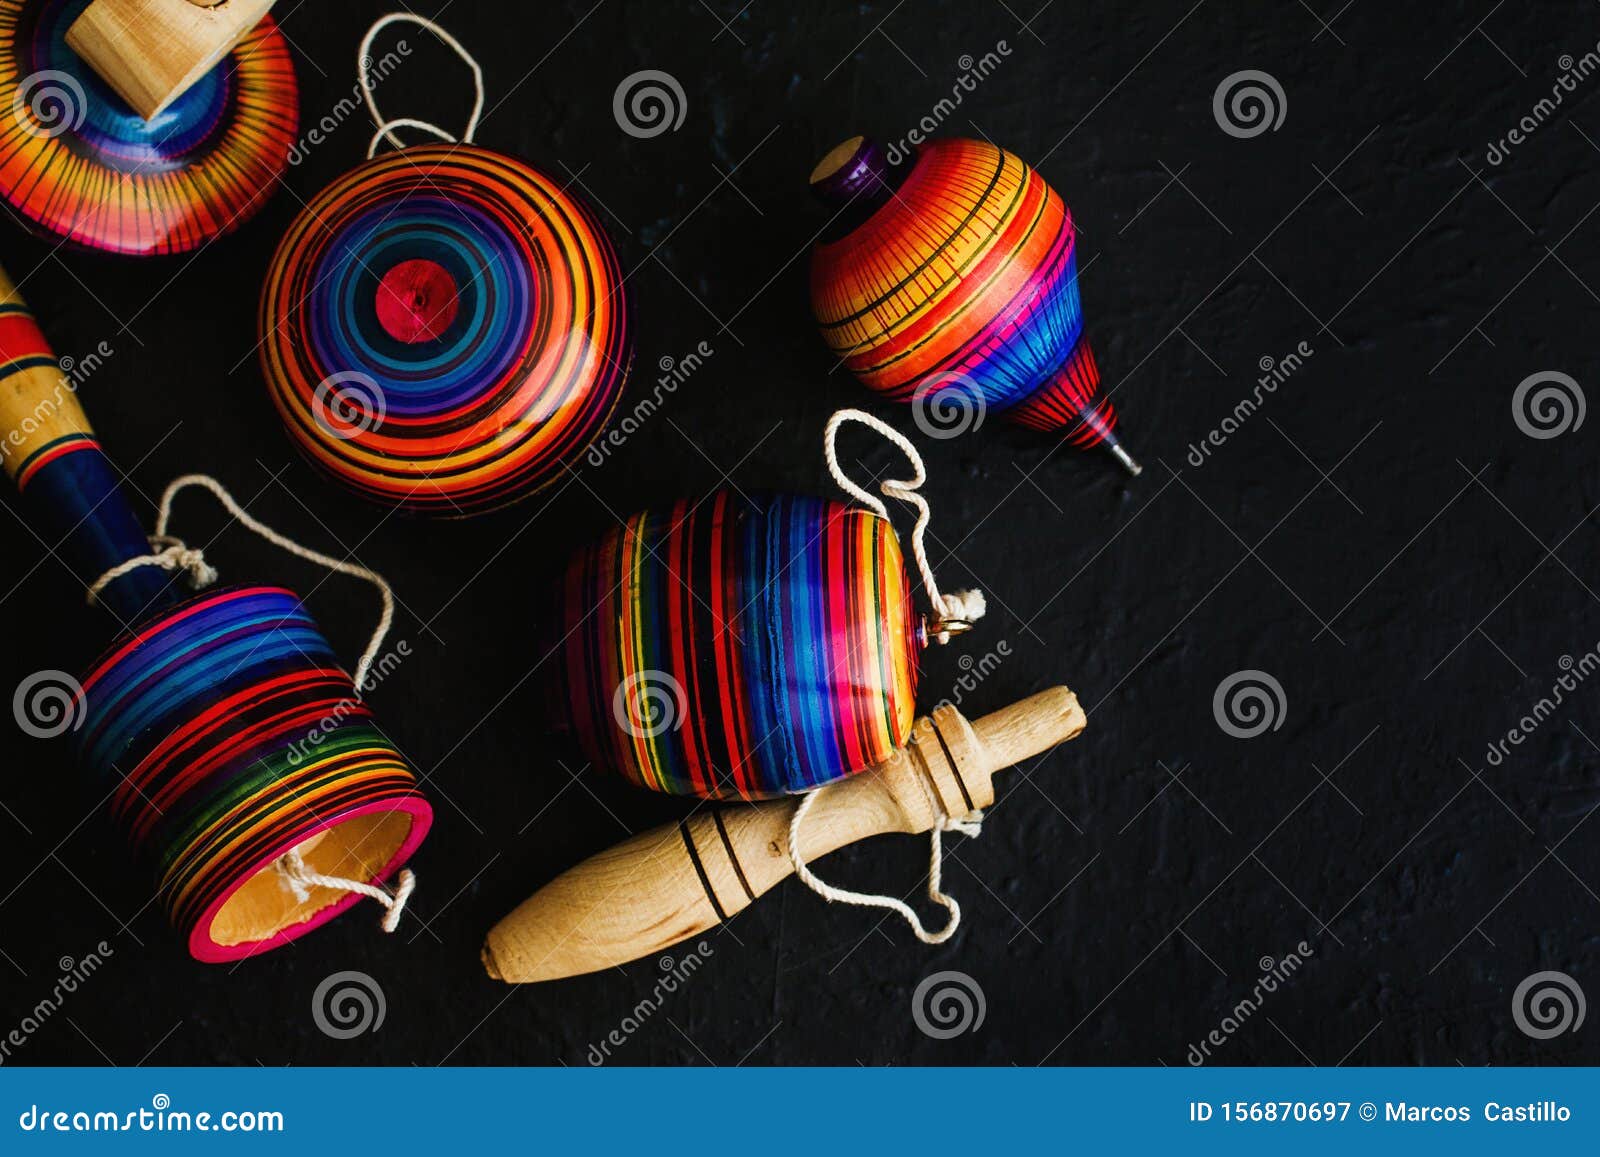 mexican toys from wooden, balero, yoyo and trompo in mexico on black background